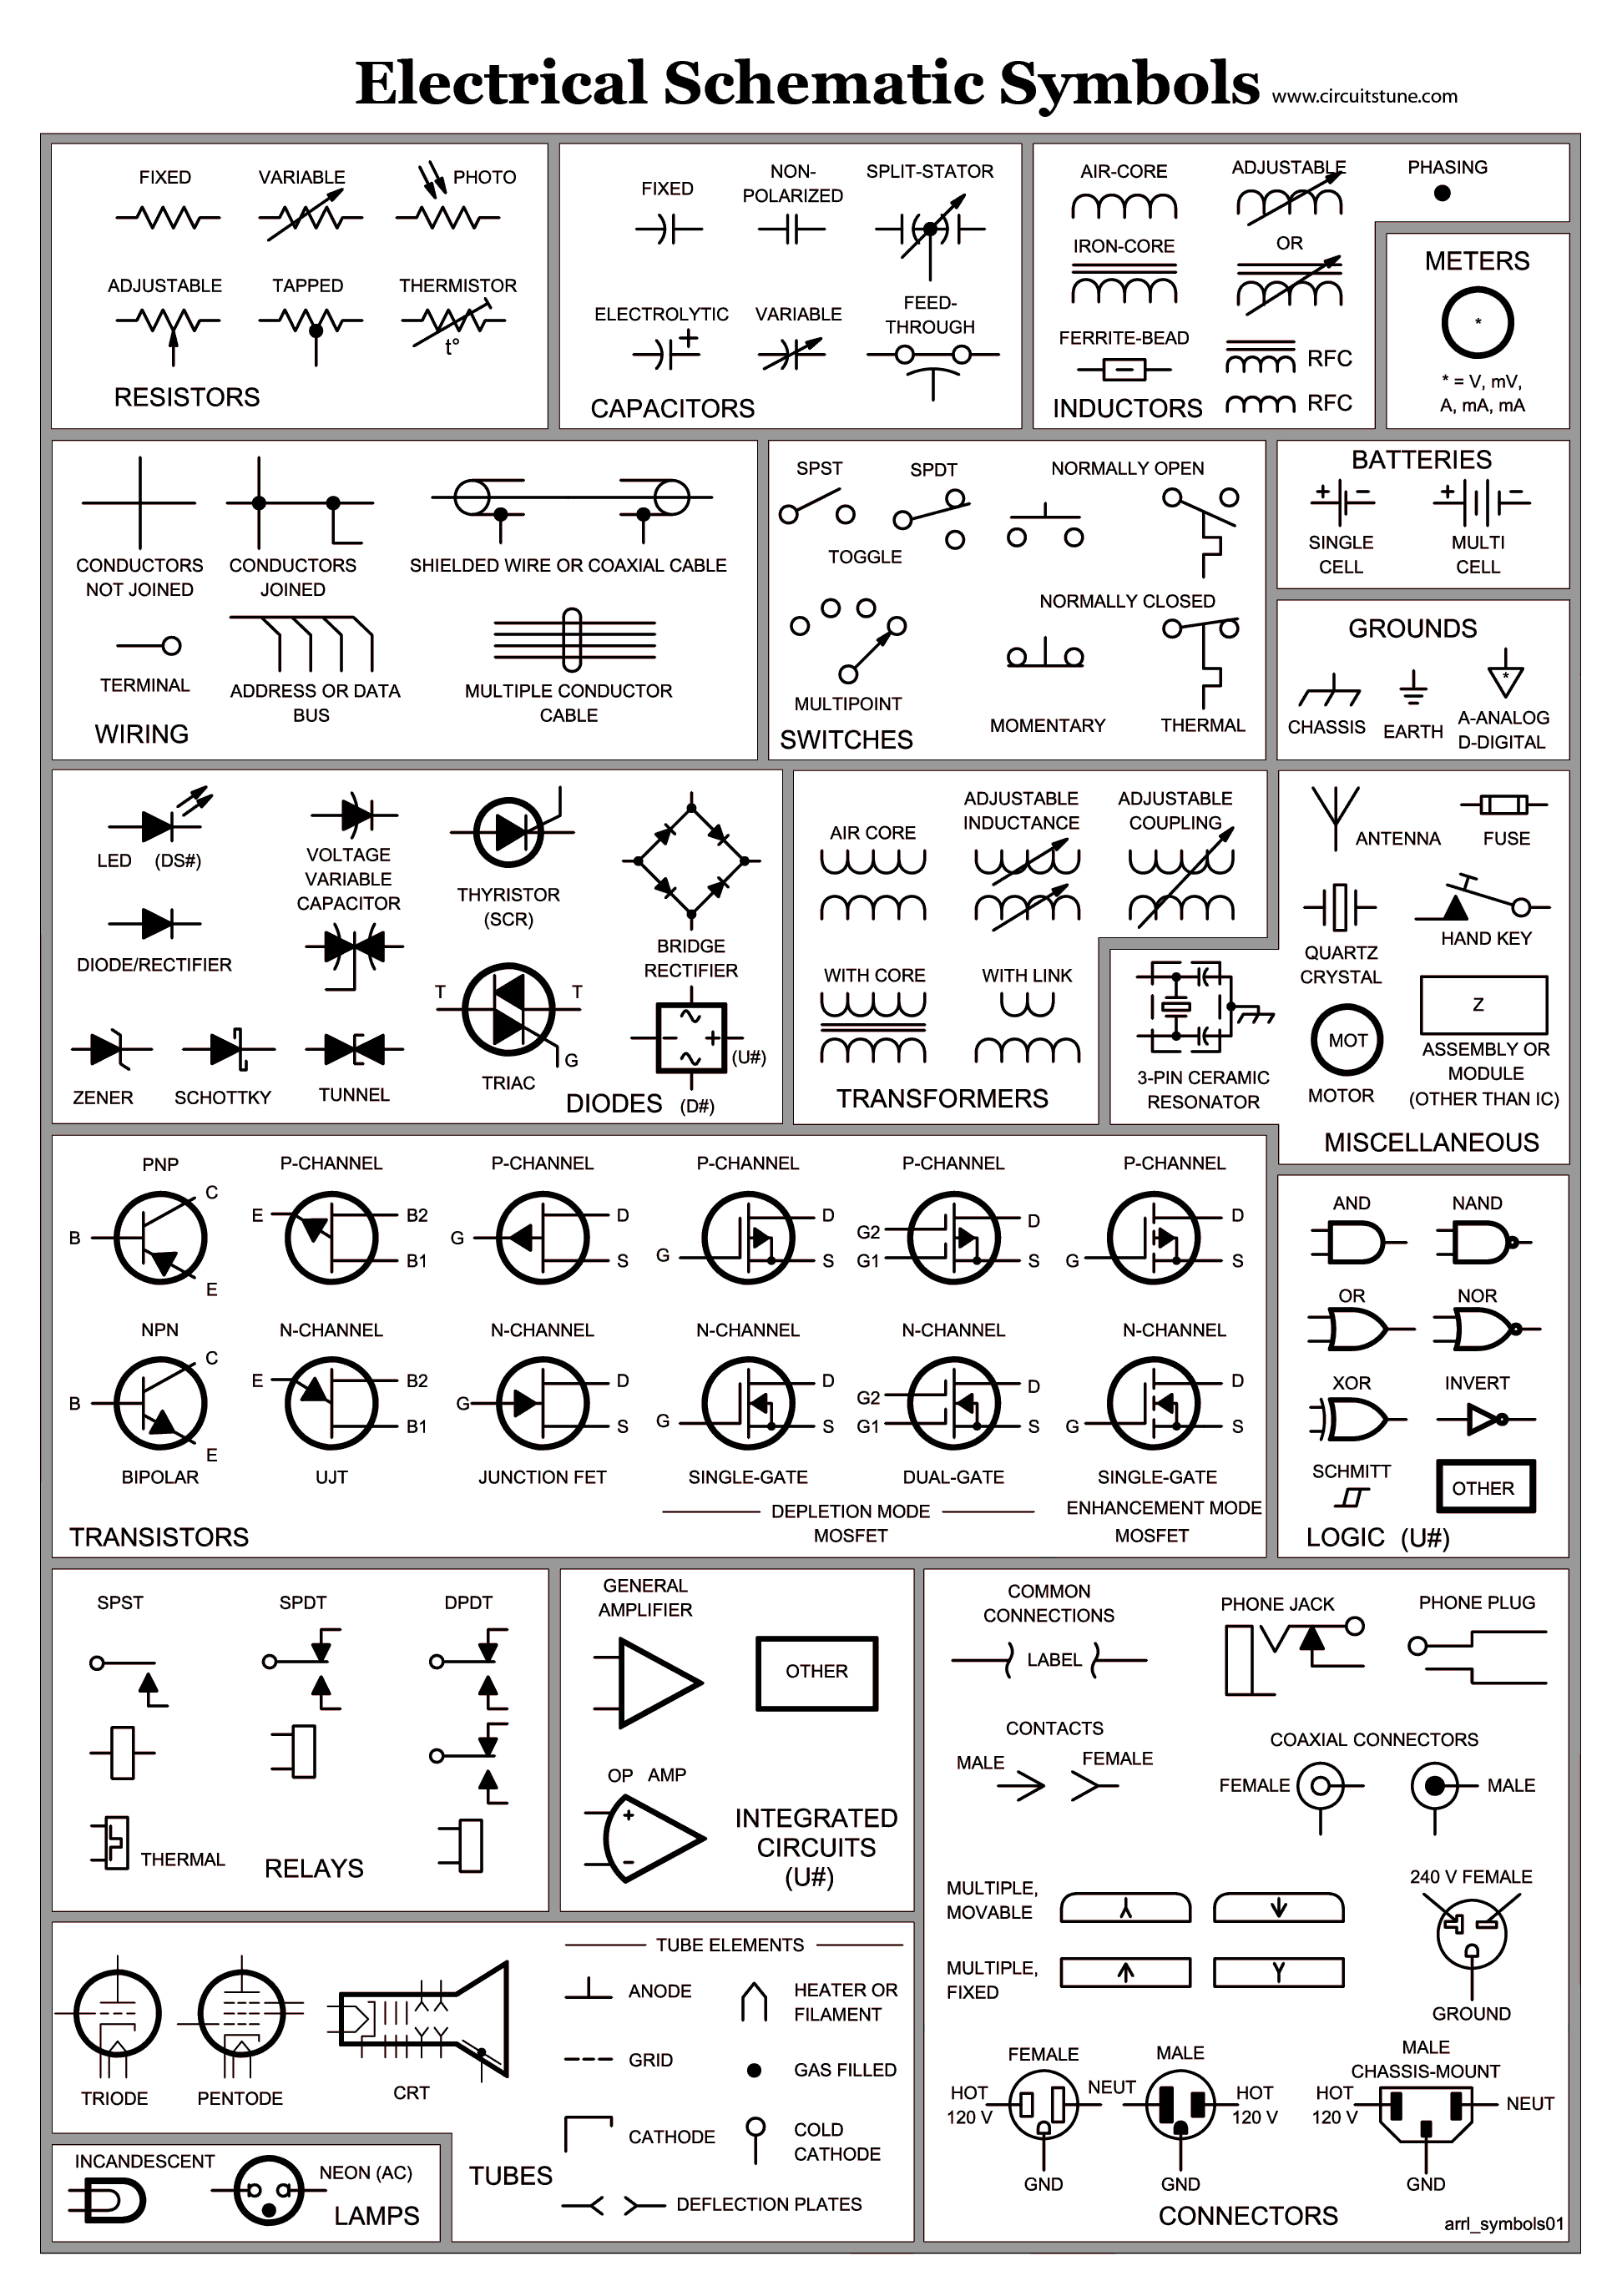 Electrical Schematic Symbols | Skinsquiggles | Pinterest - Electrical Wiring Diagram Symbols